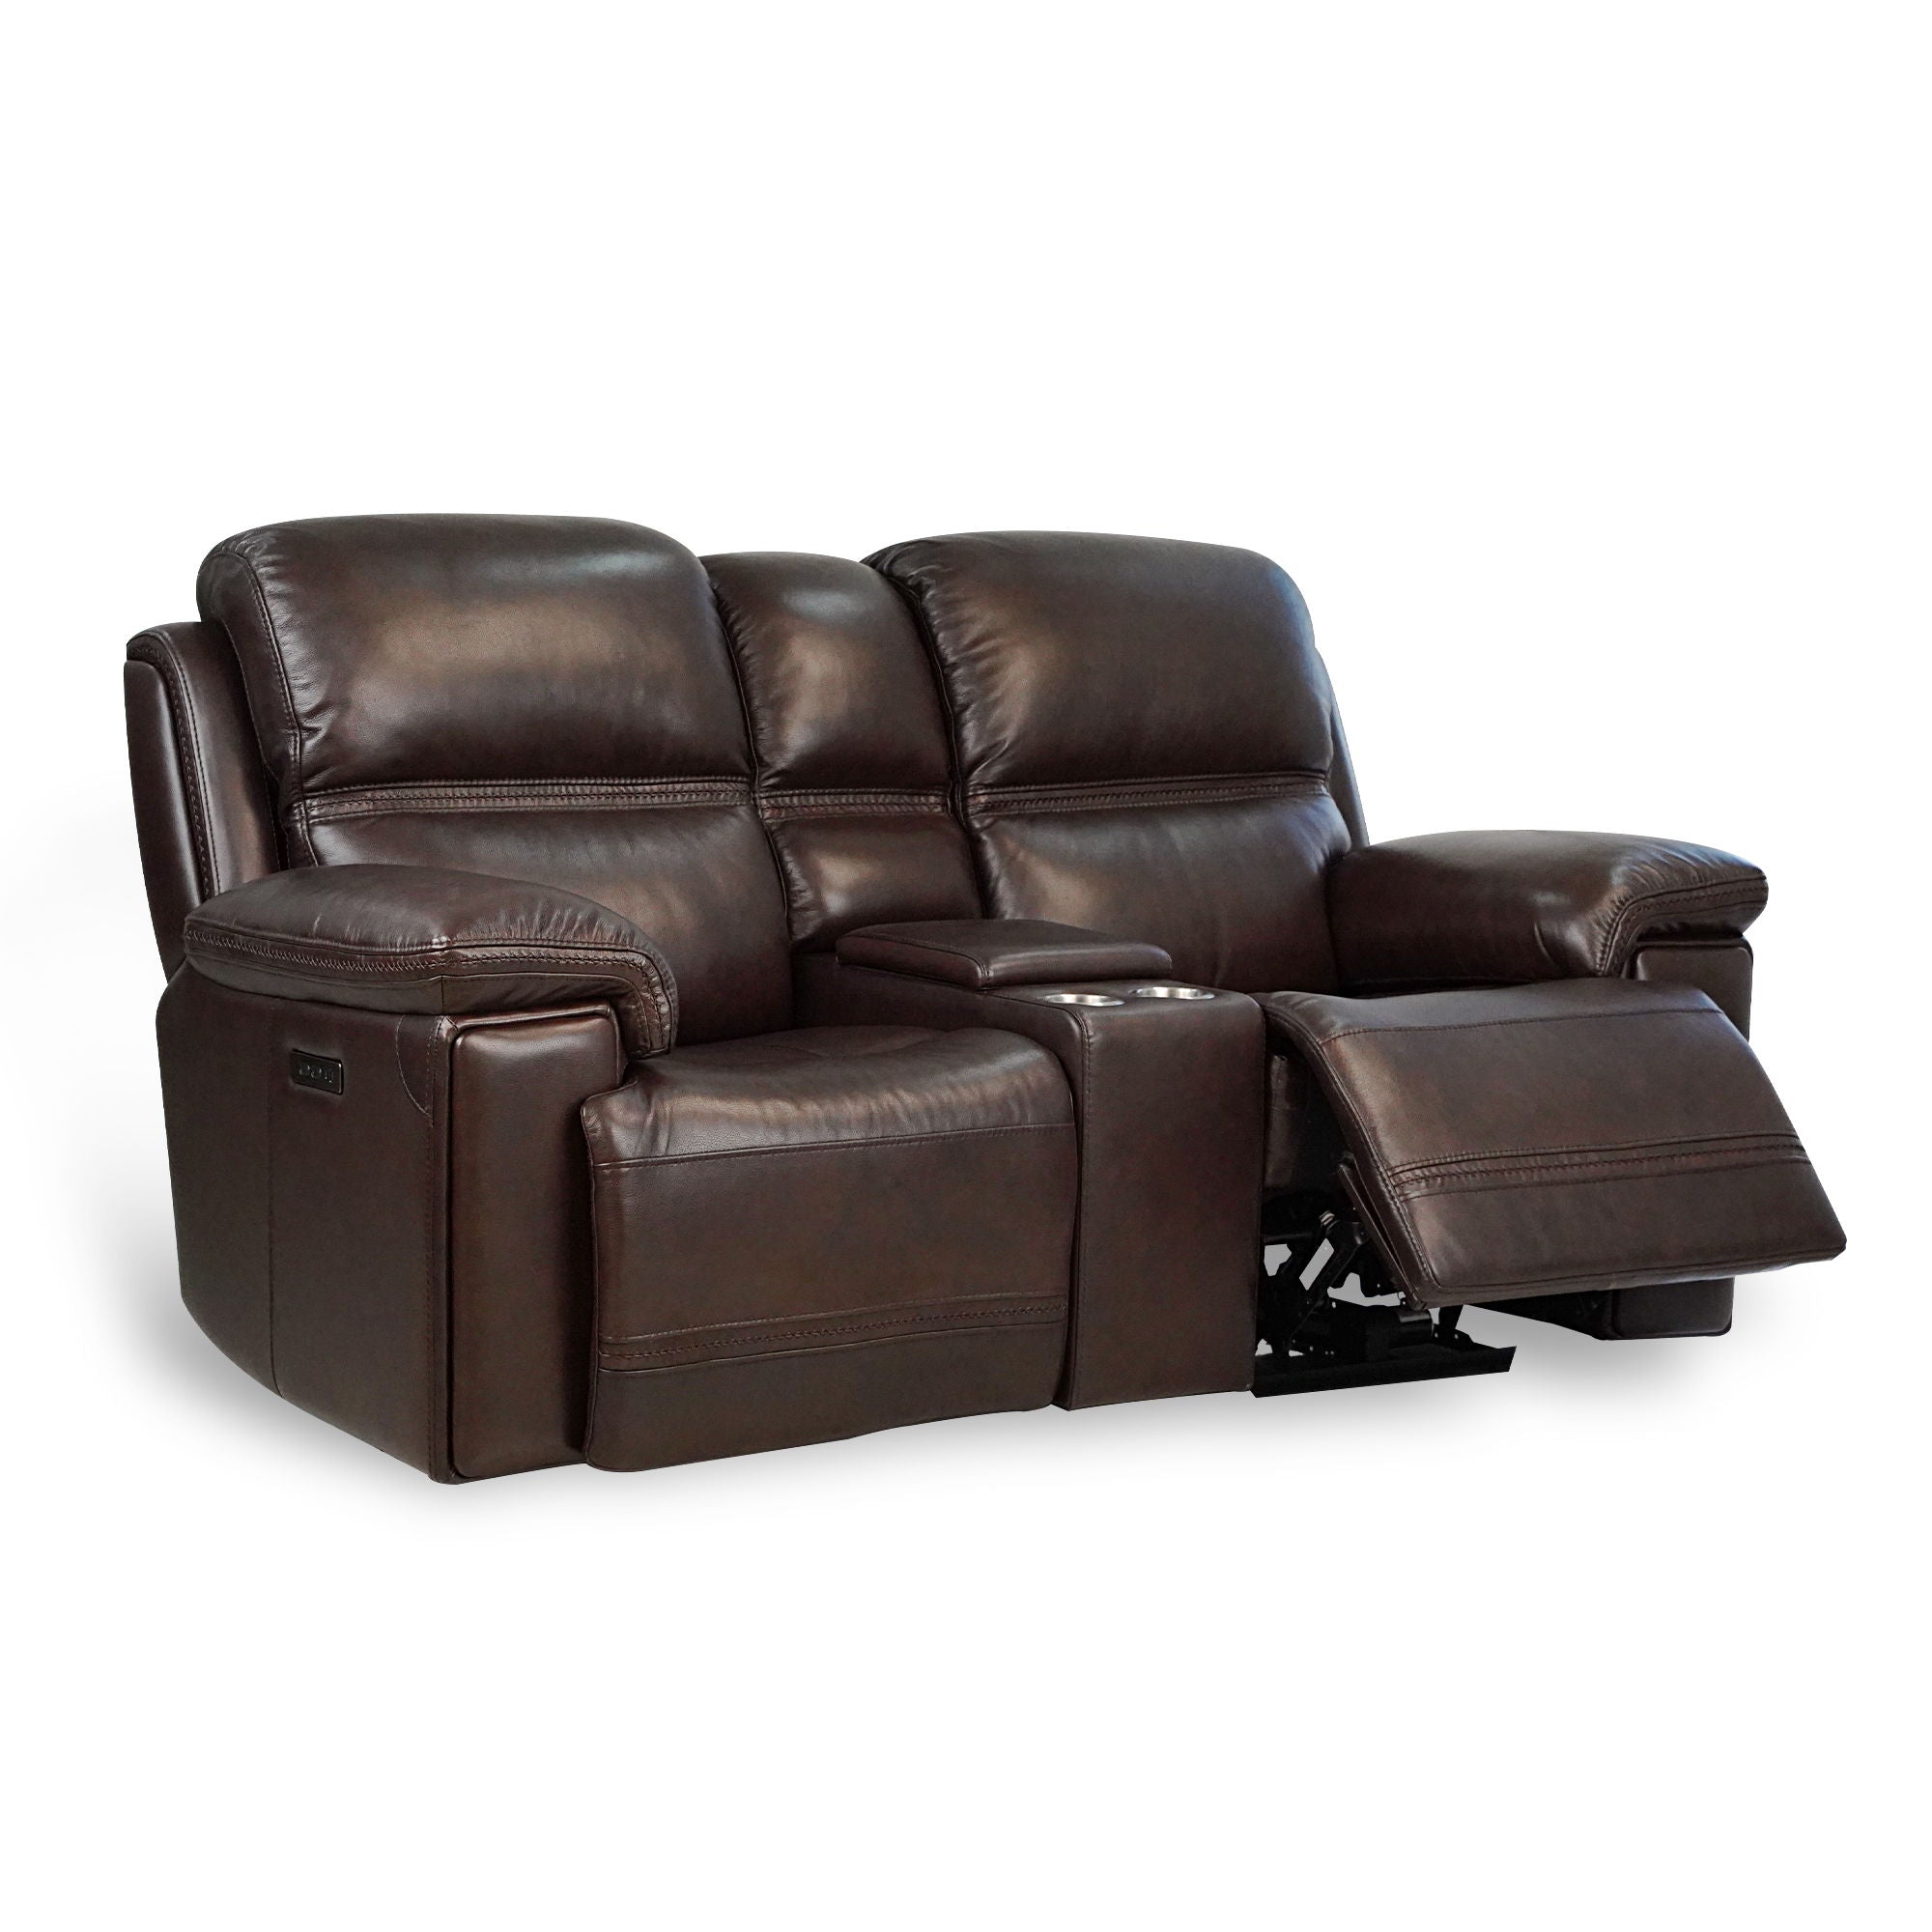 Timo Top Grain Leather Power Reclining Loveseat With Console, Adjustable Headrest, Storage, Steel Cup Holders, Cross Stitching